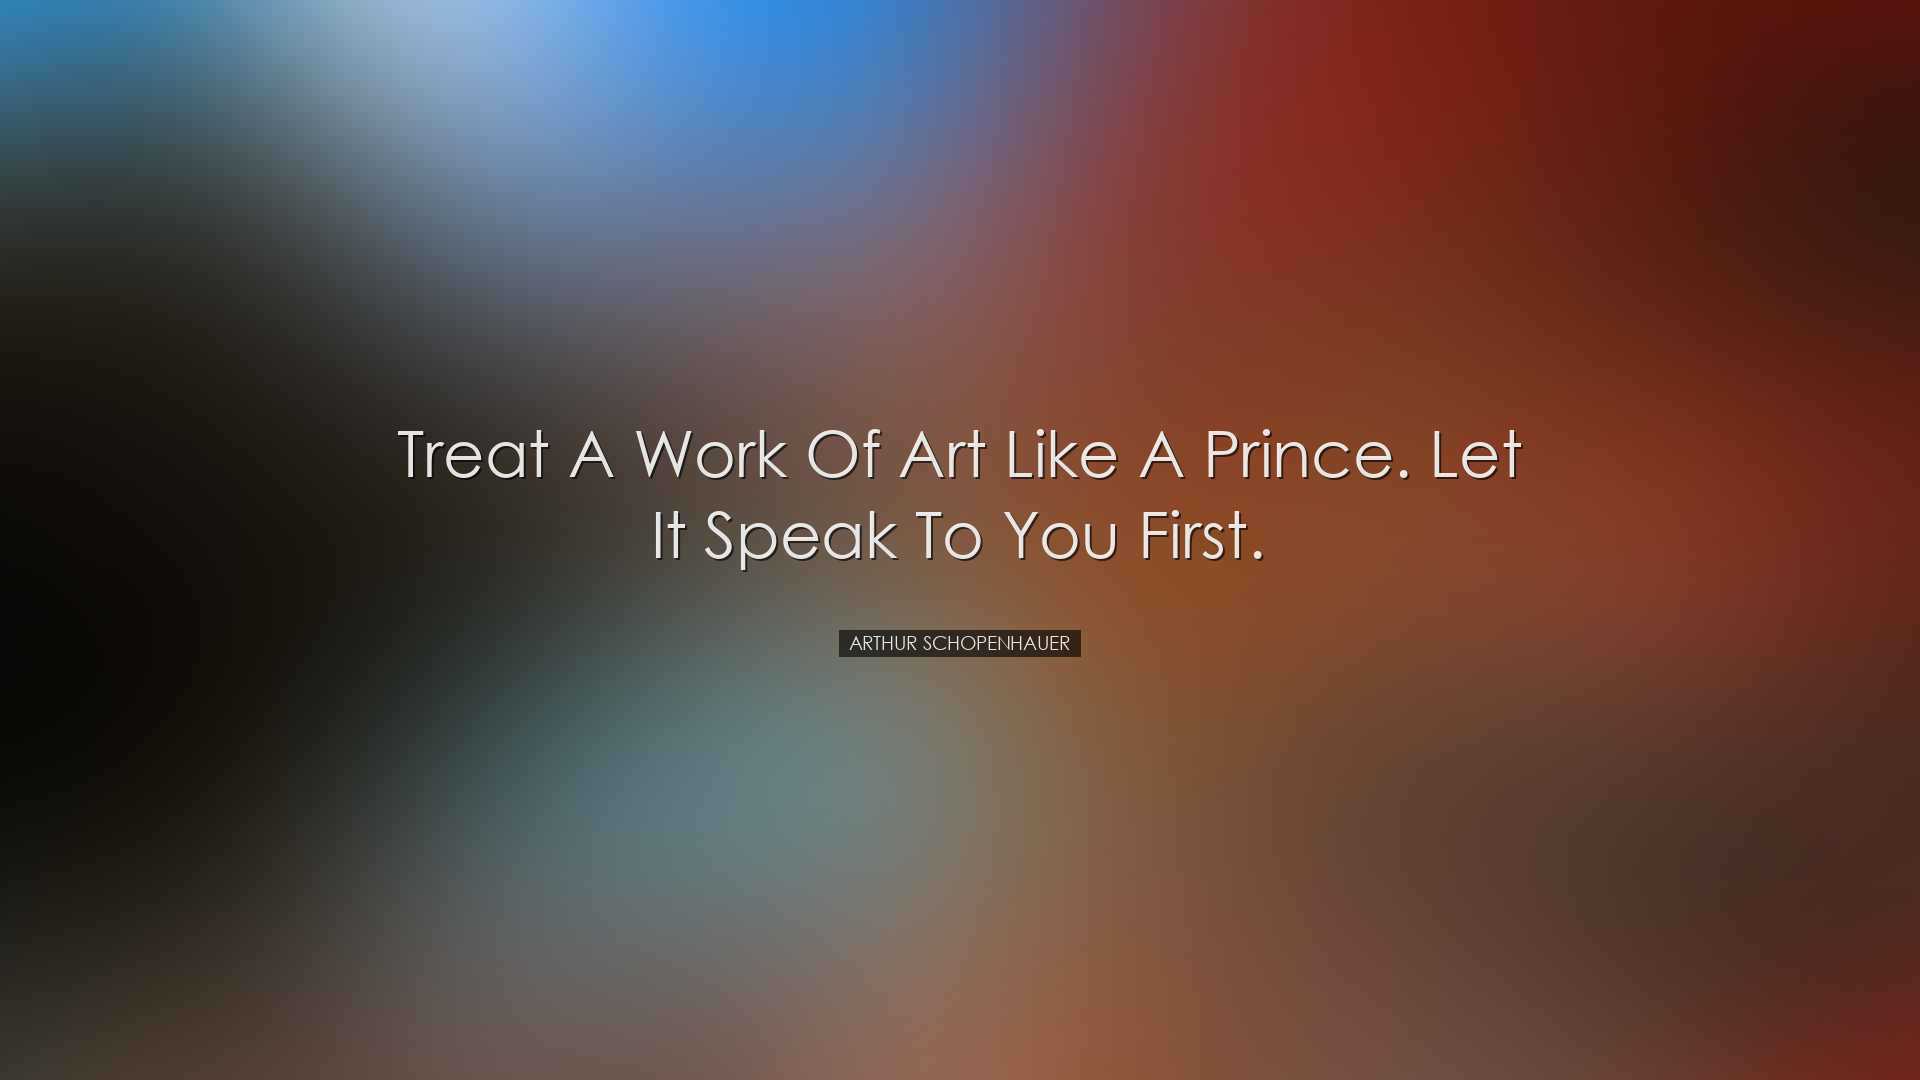 Treat a work of art like a prince. Let it speak to you first. - Ar